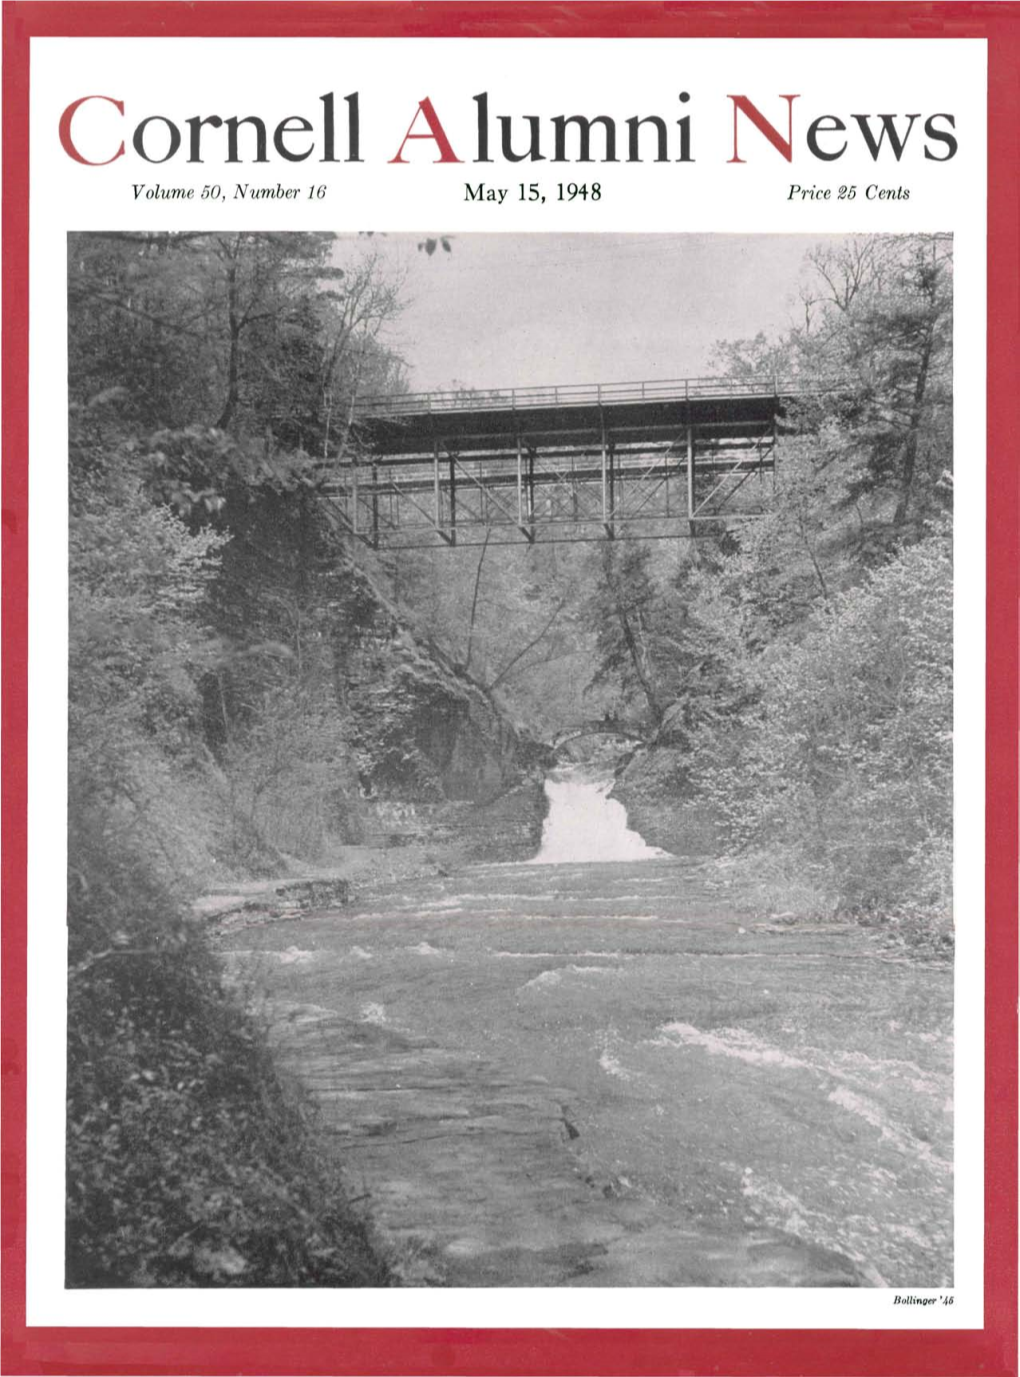 Cornell Alumni News Volume 50, Number 16 May 15, 1948 Price 25 Cents